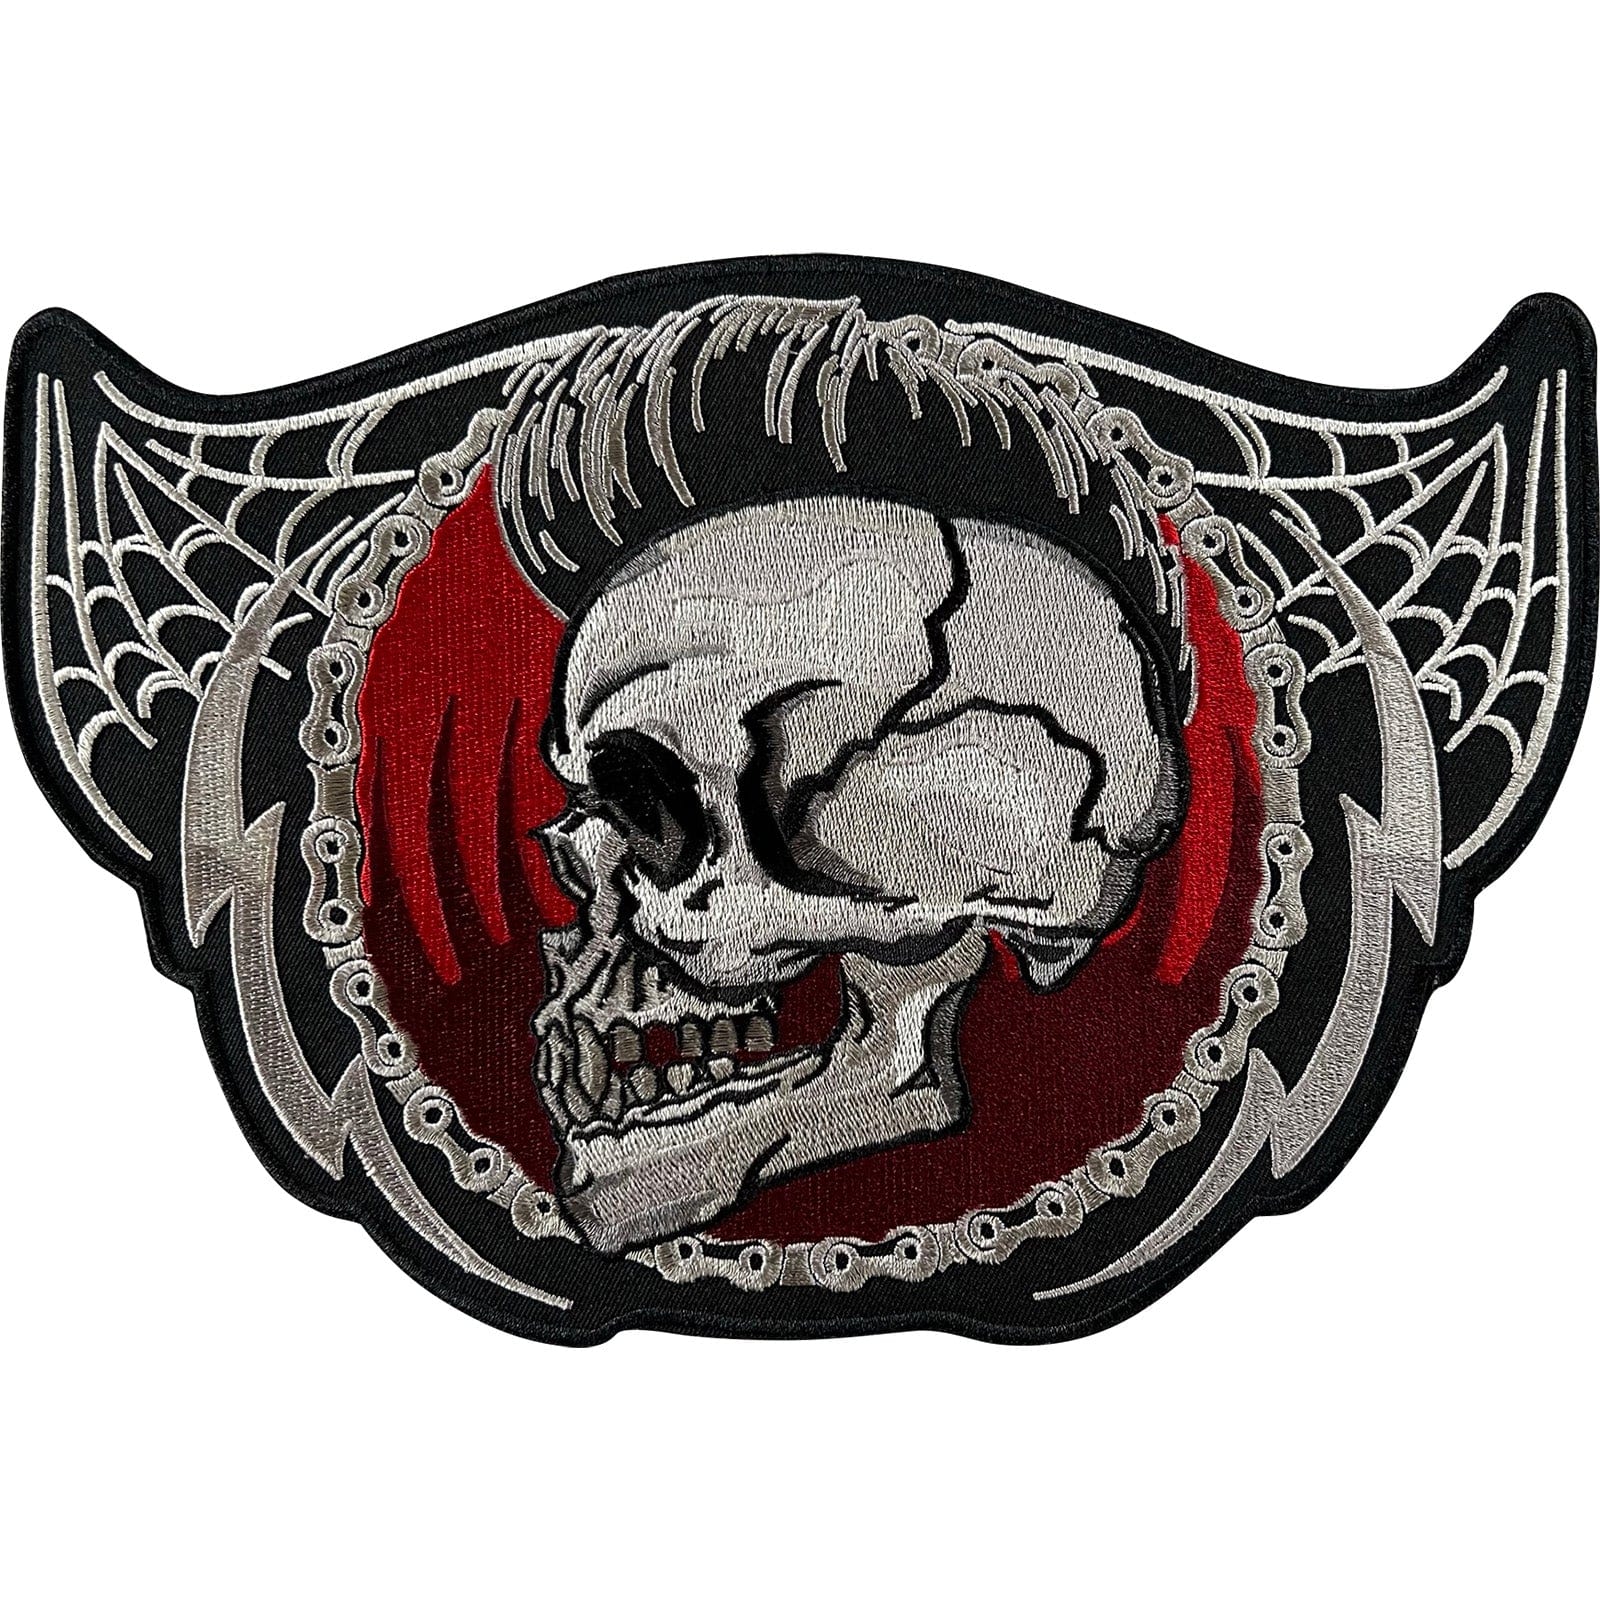 Large Skull Spider Web Chain Patch Iron Sew On Clothes Gothic Embroidered Badge